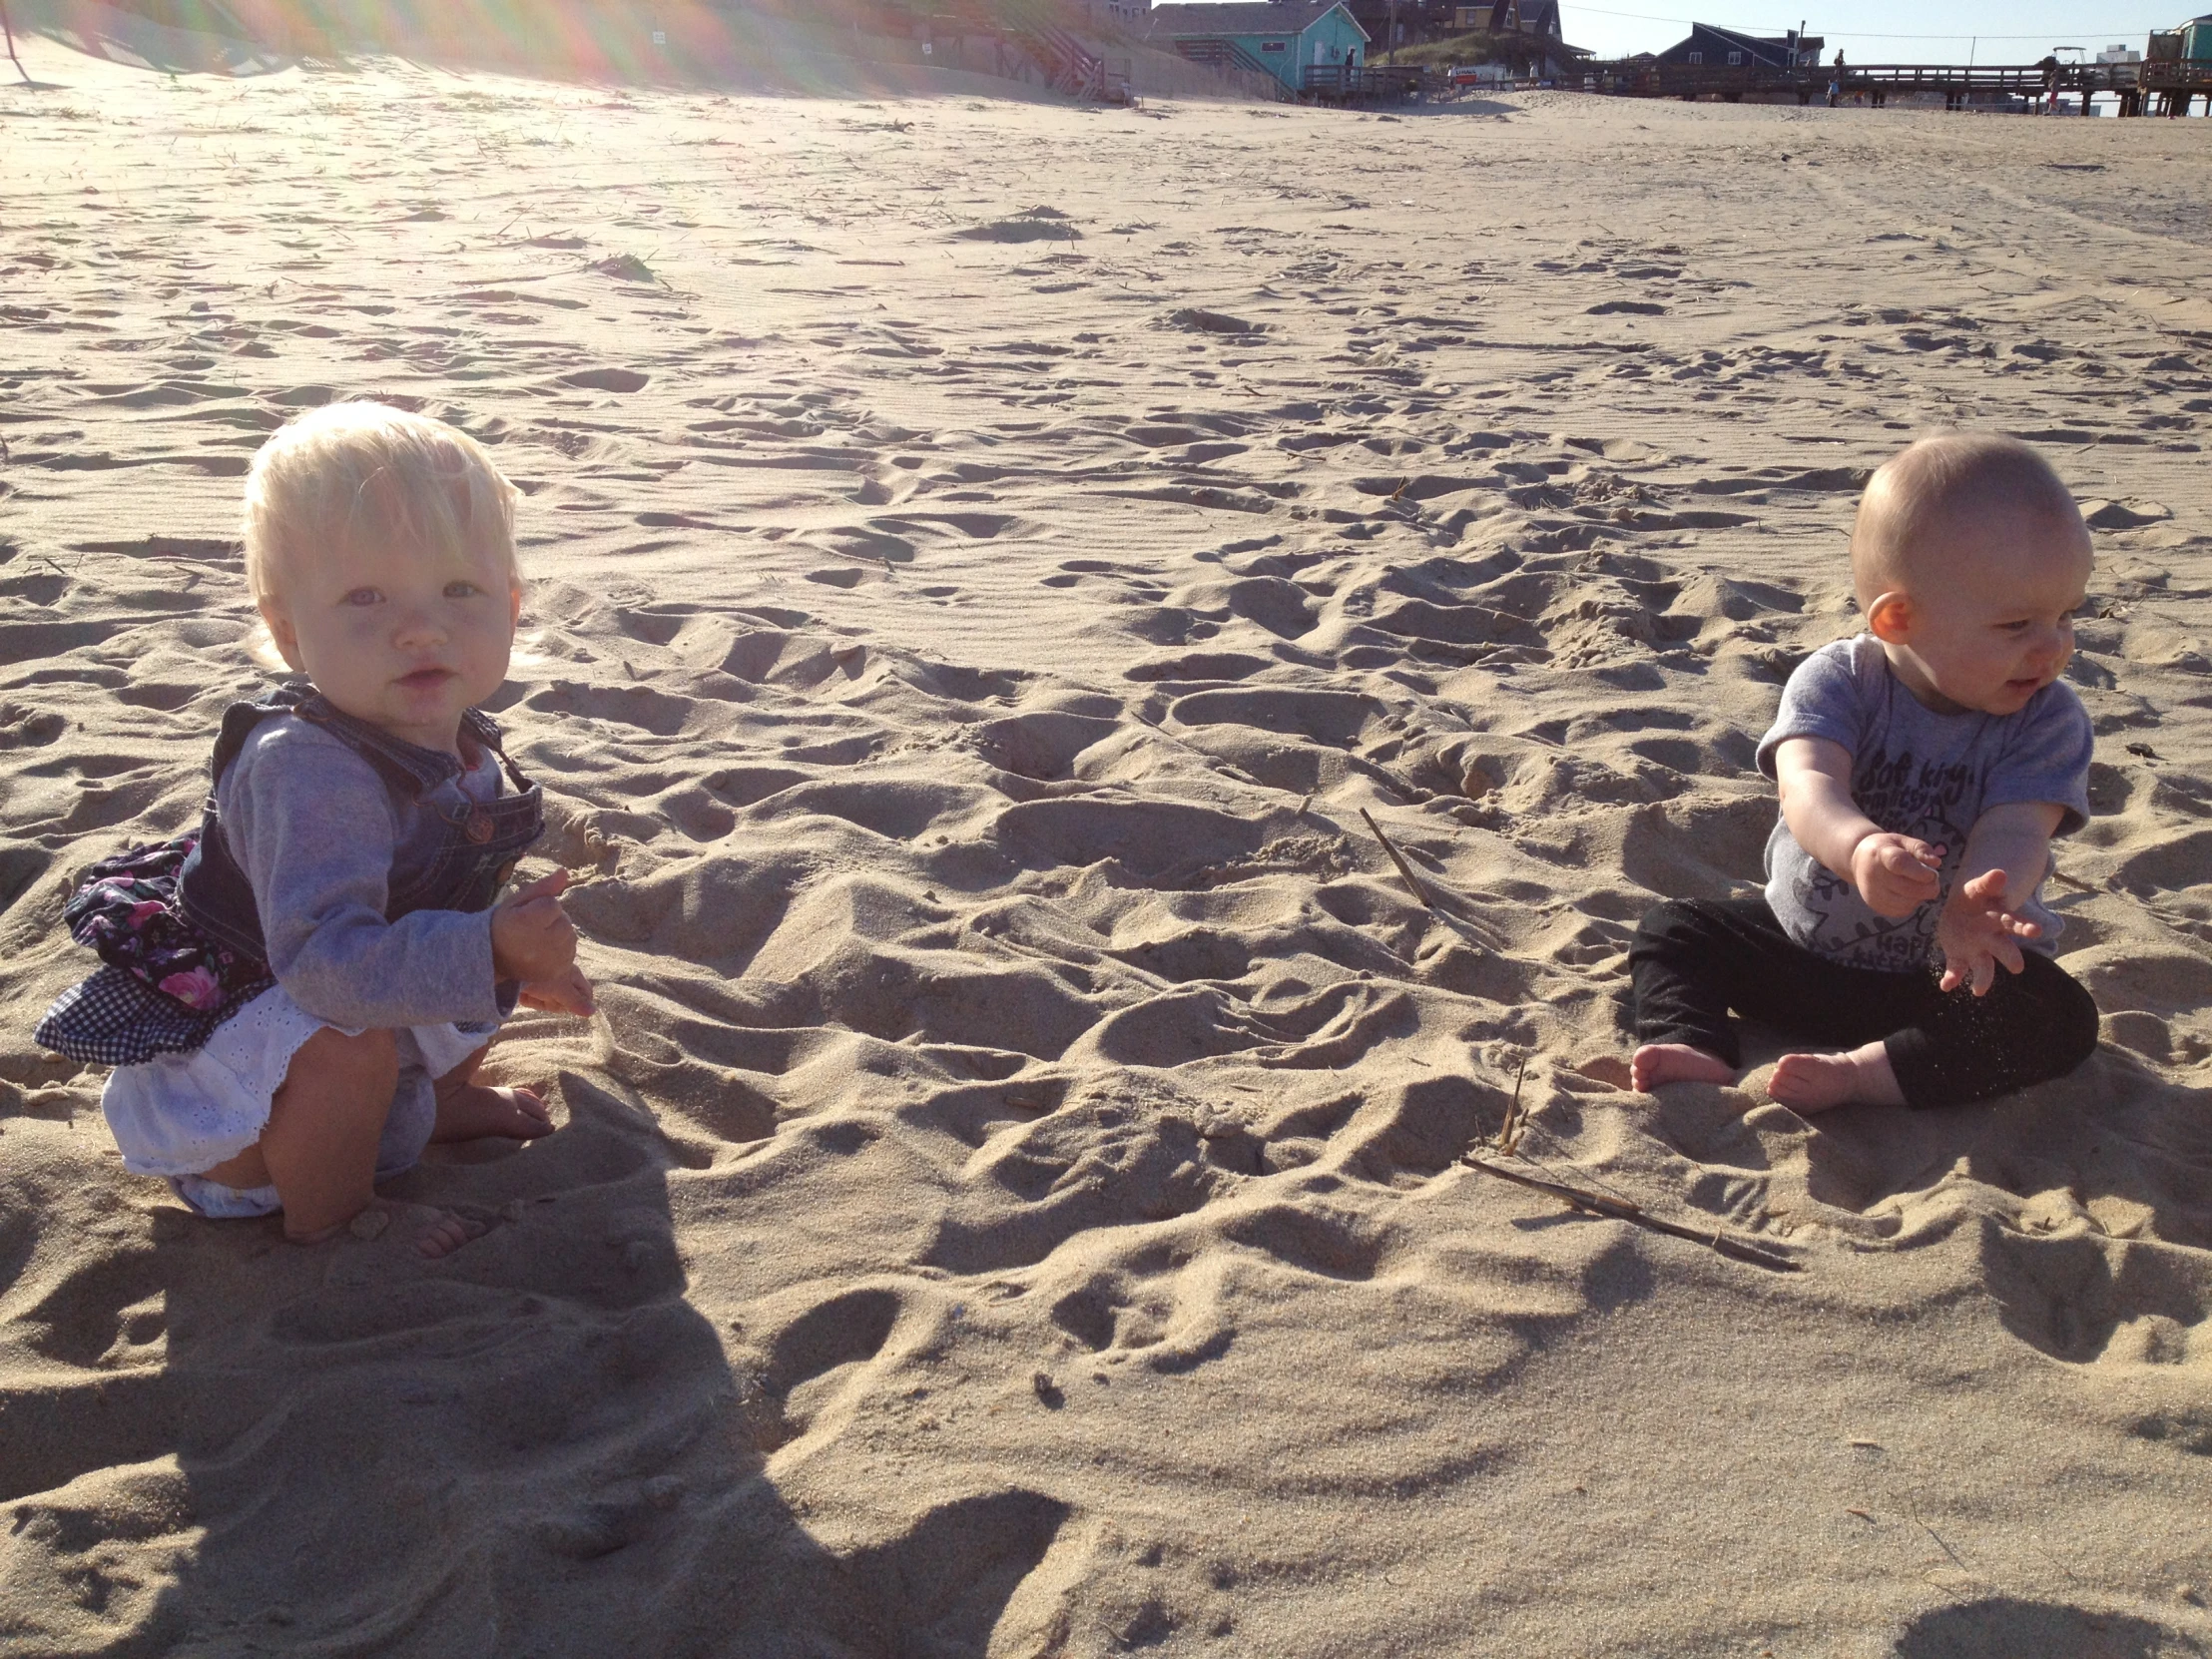 two babies sitting in the sand at a beach